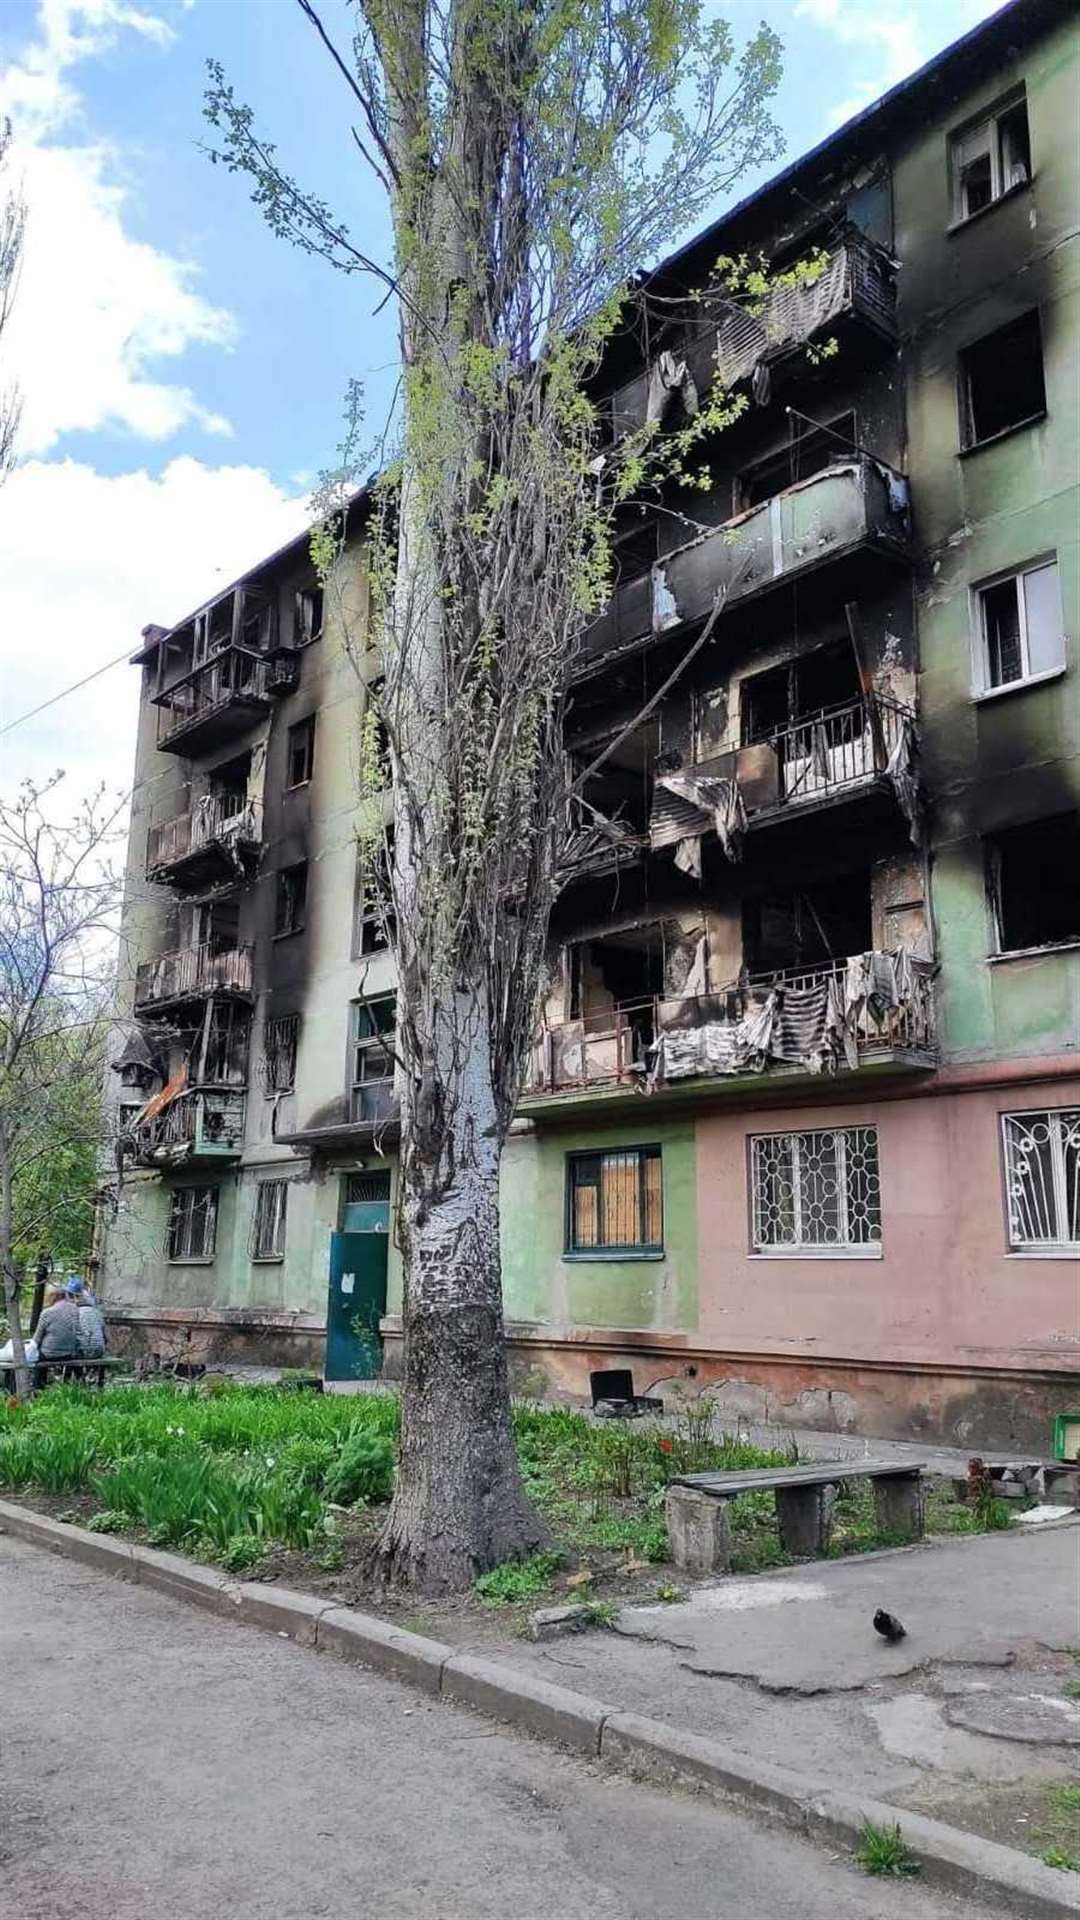 The family’s bombed apartment in Mariupol.